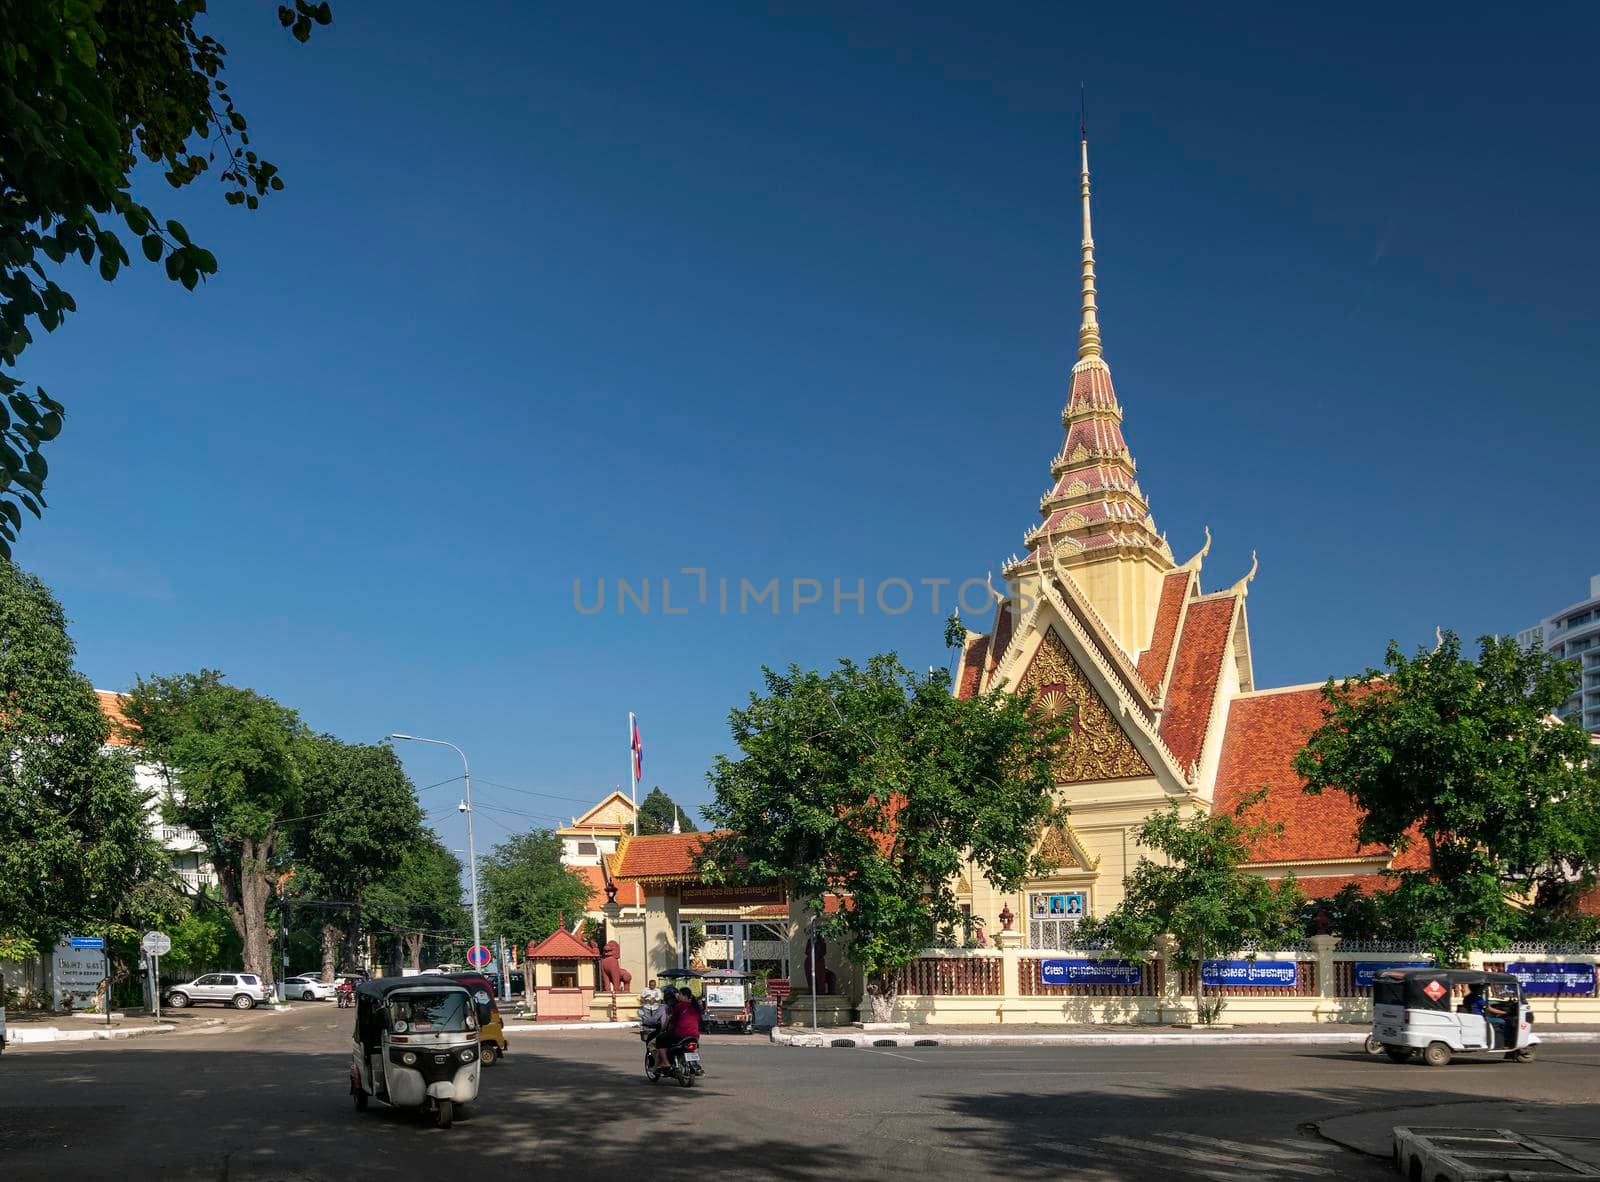 courthouse and street view of  downtown phnom penh city cambodia by jackmalipan